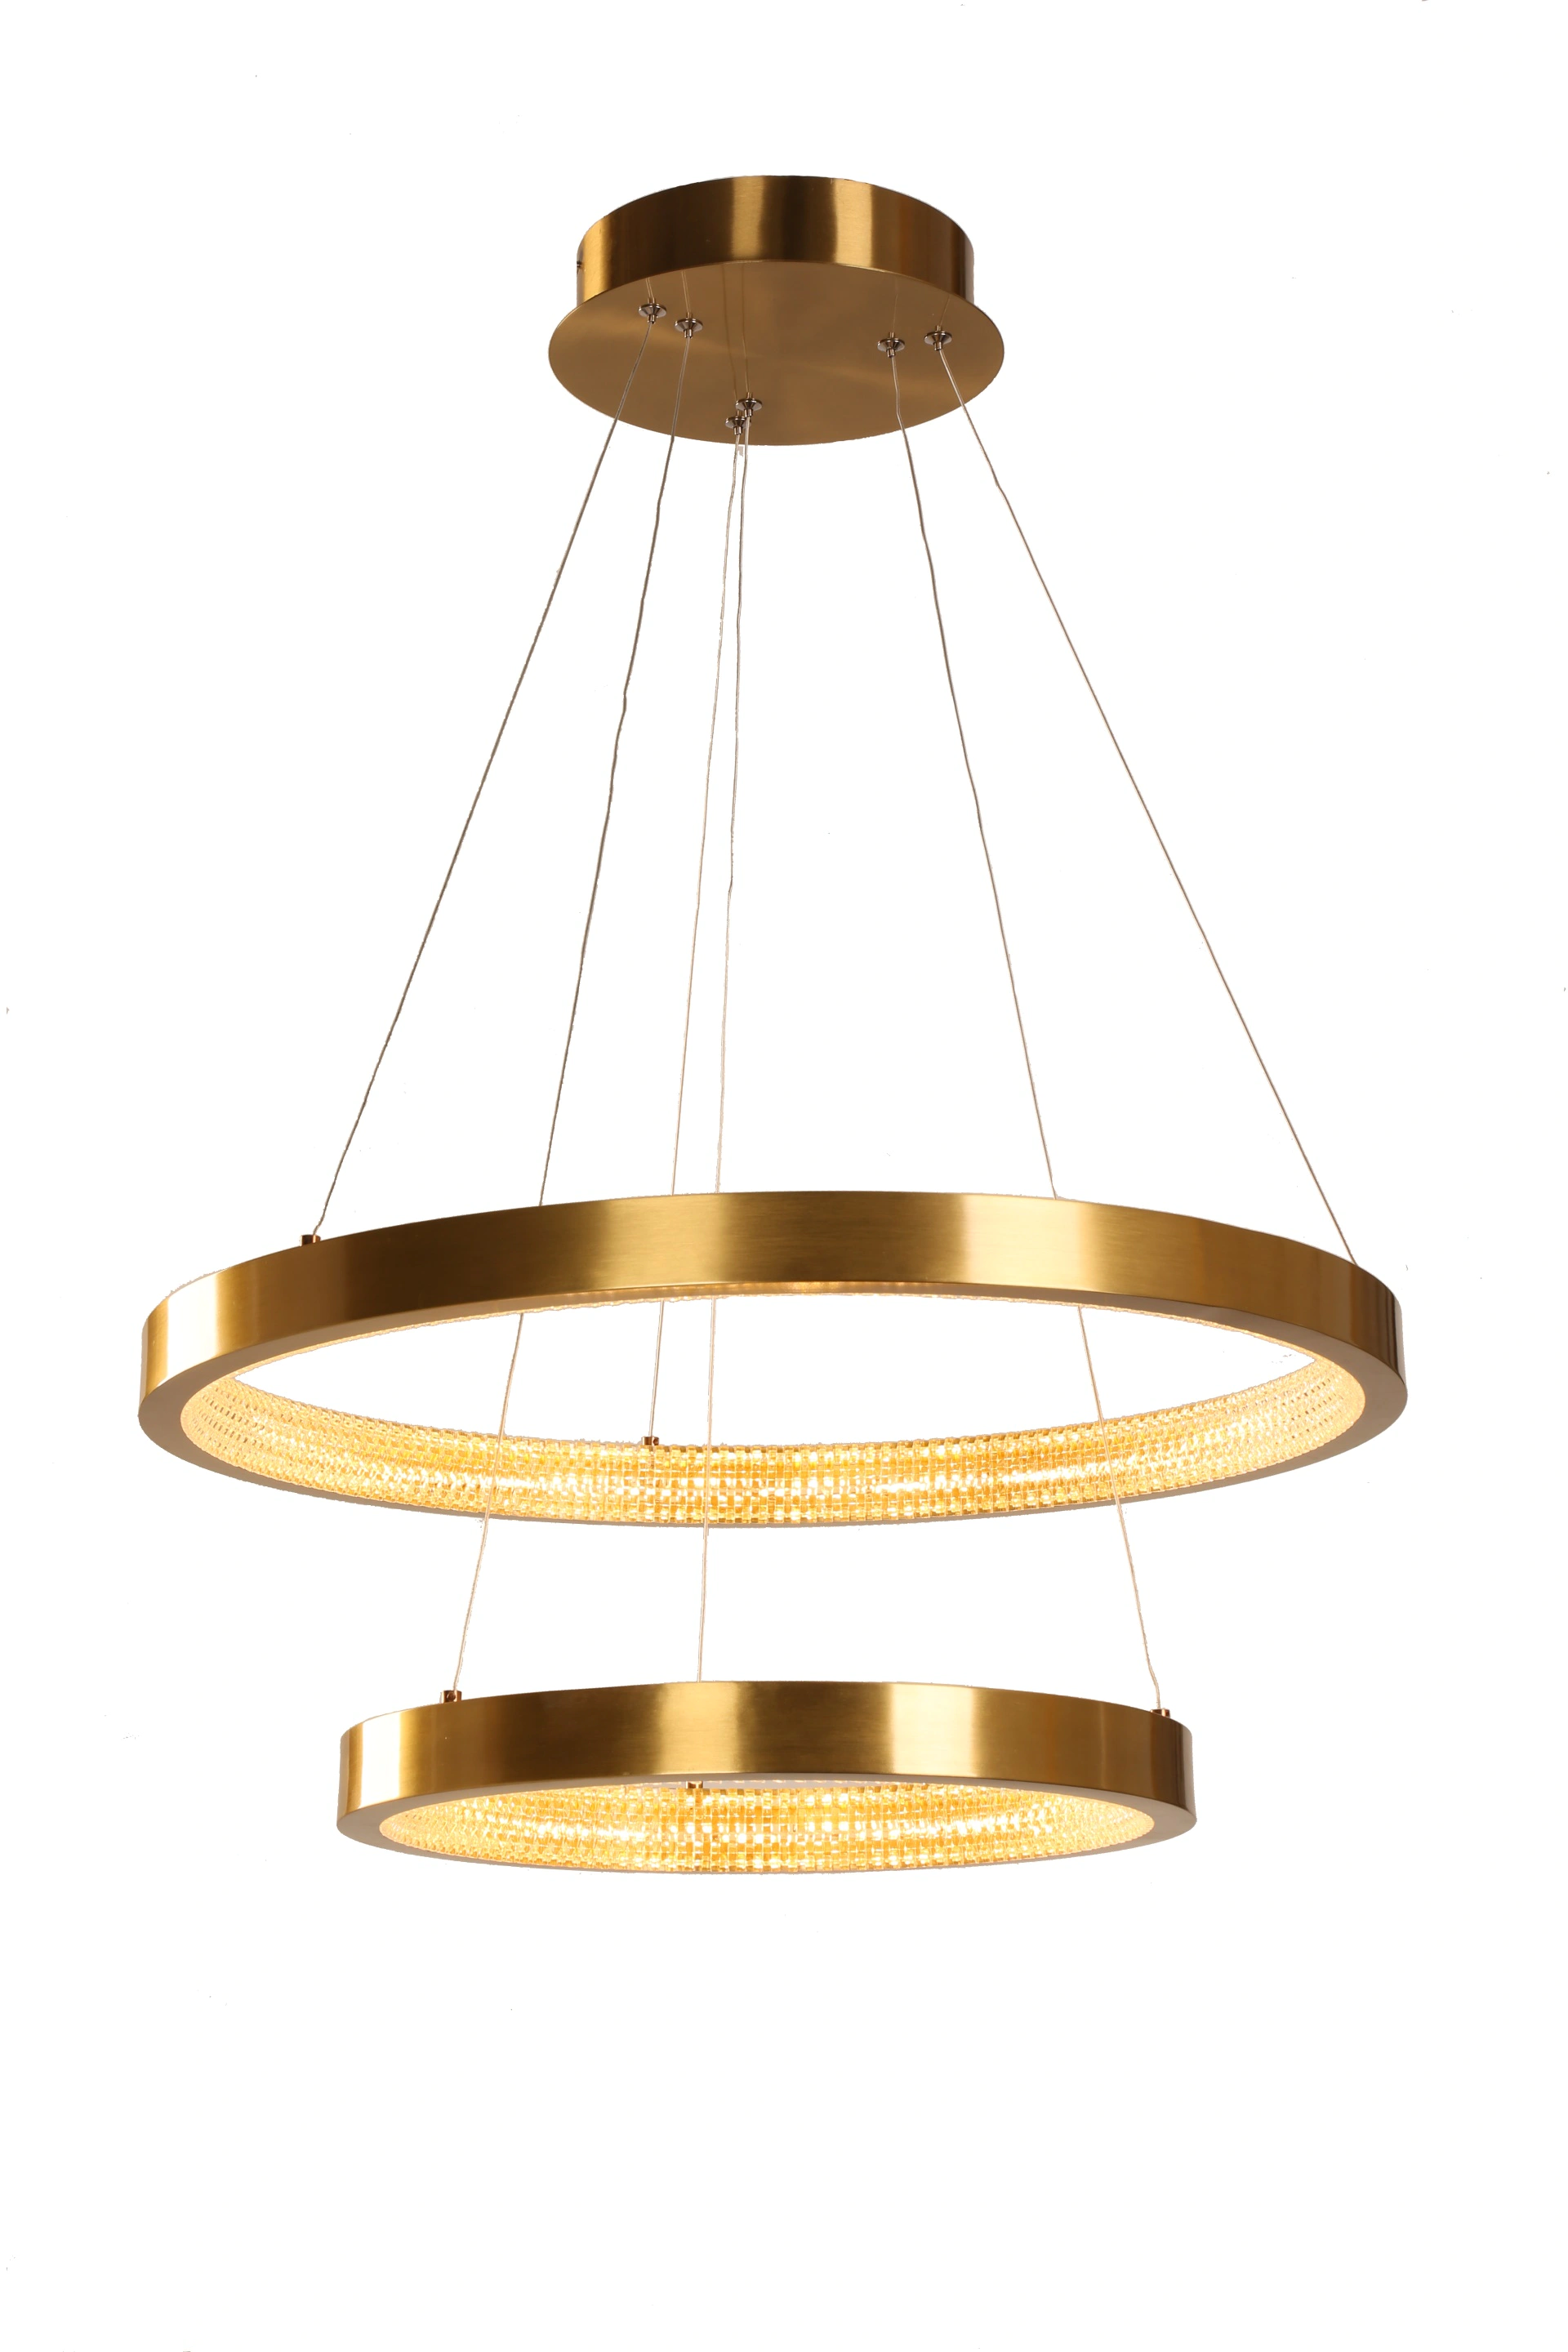 Saintly 67431b24wa modern led chandeliers manufacturer for kitchen